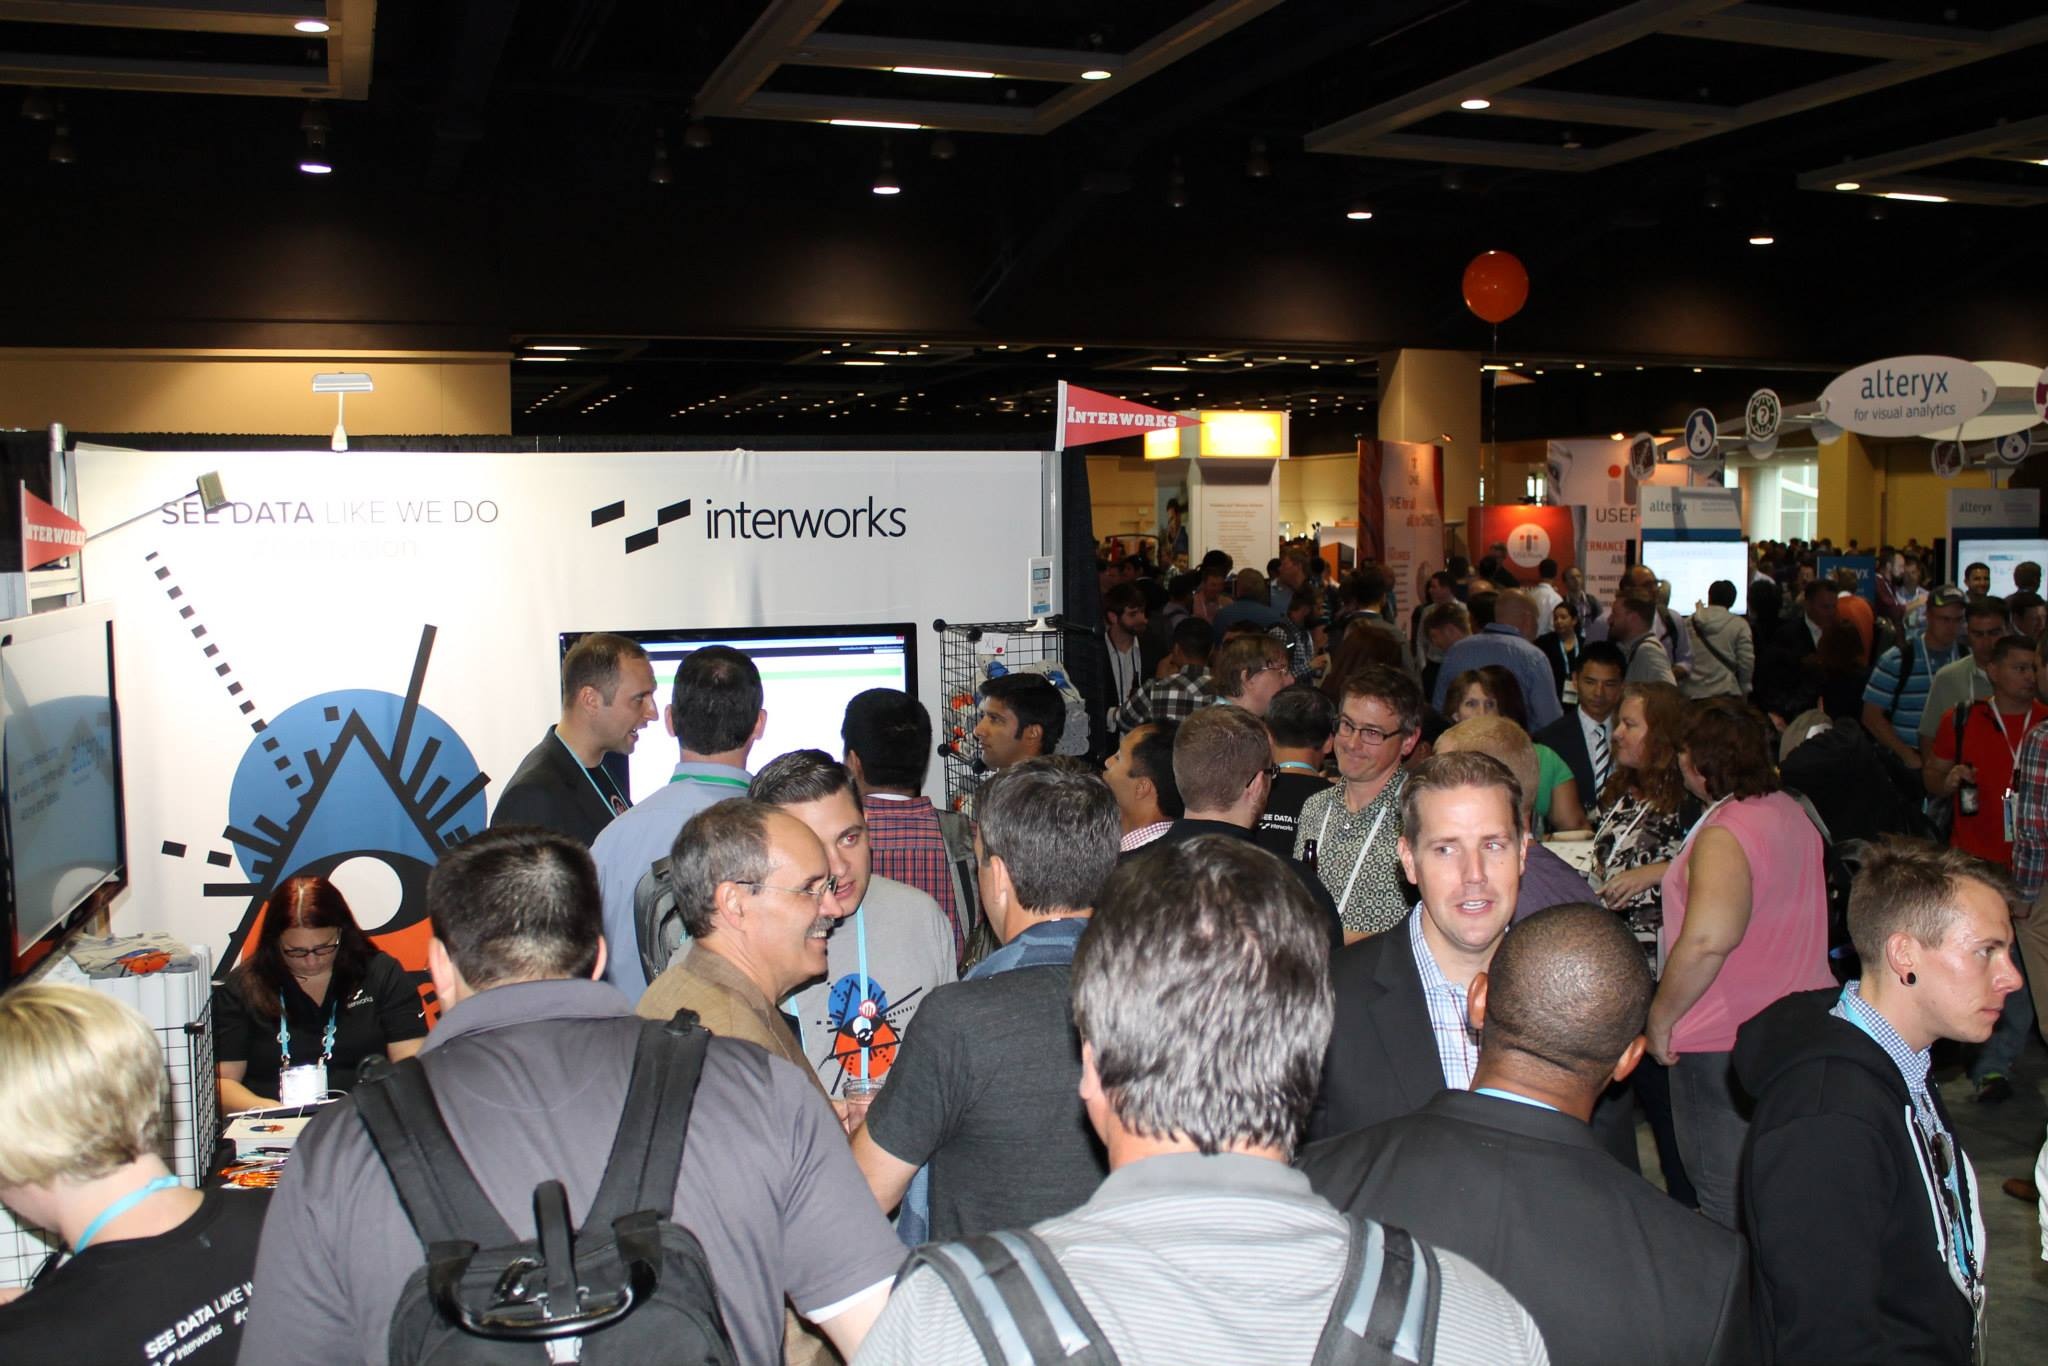 InterWorks’ booth during the welcome reception